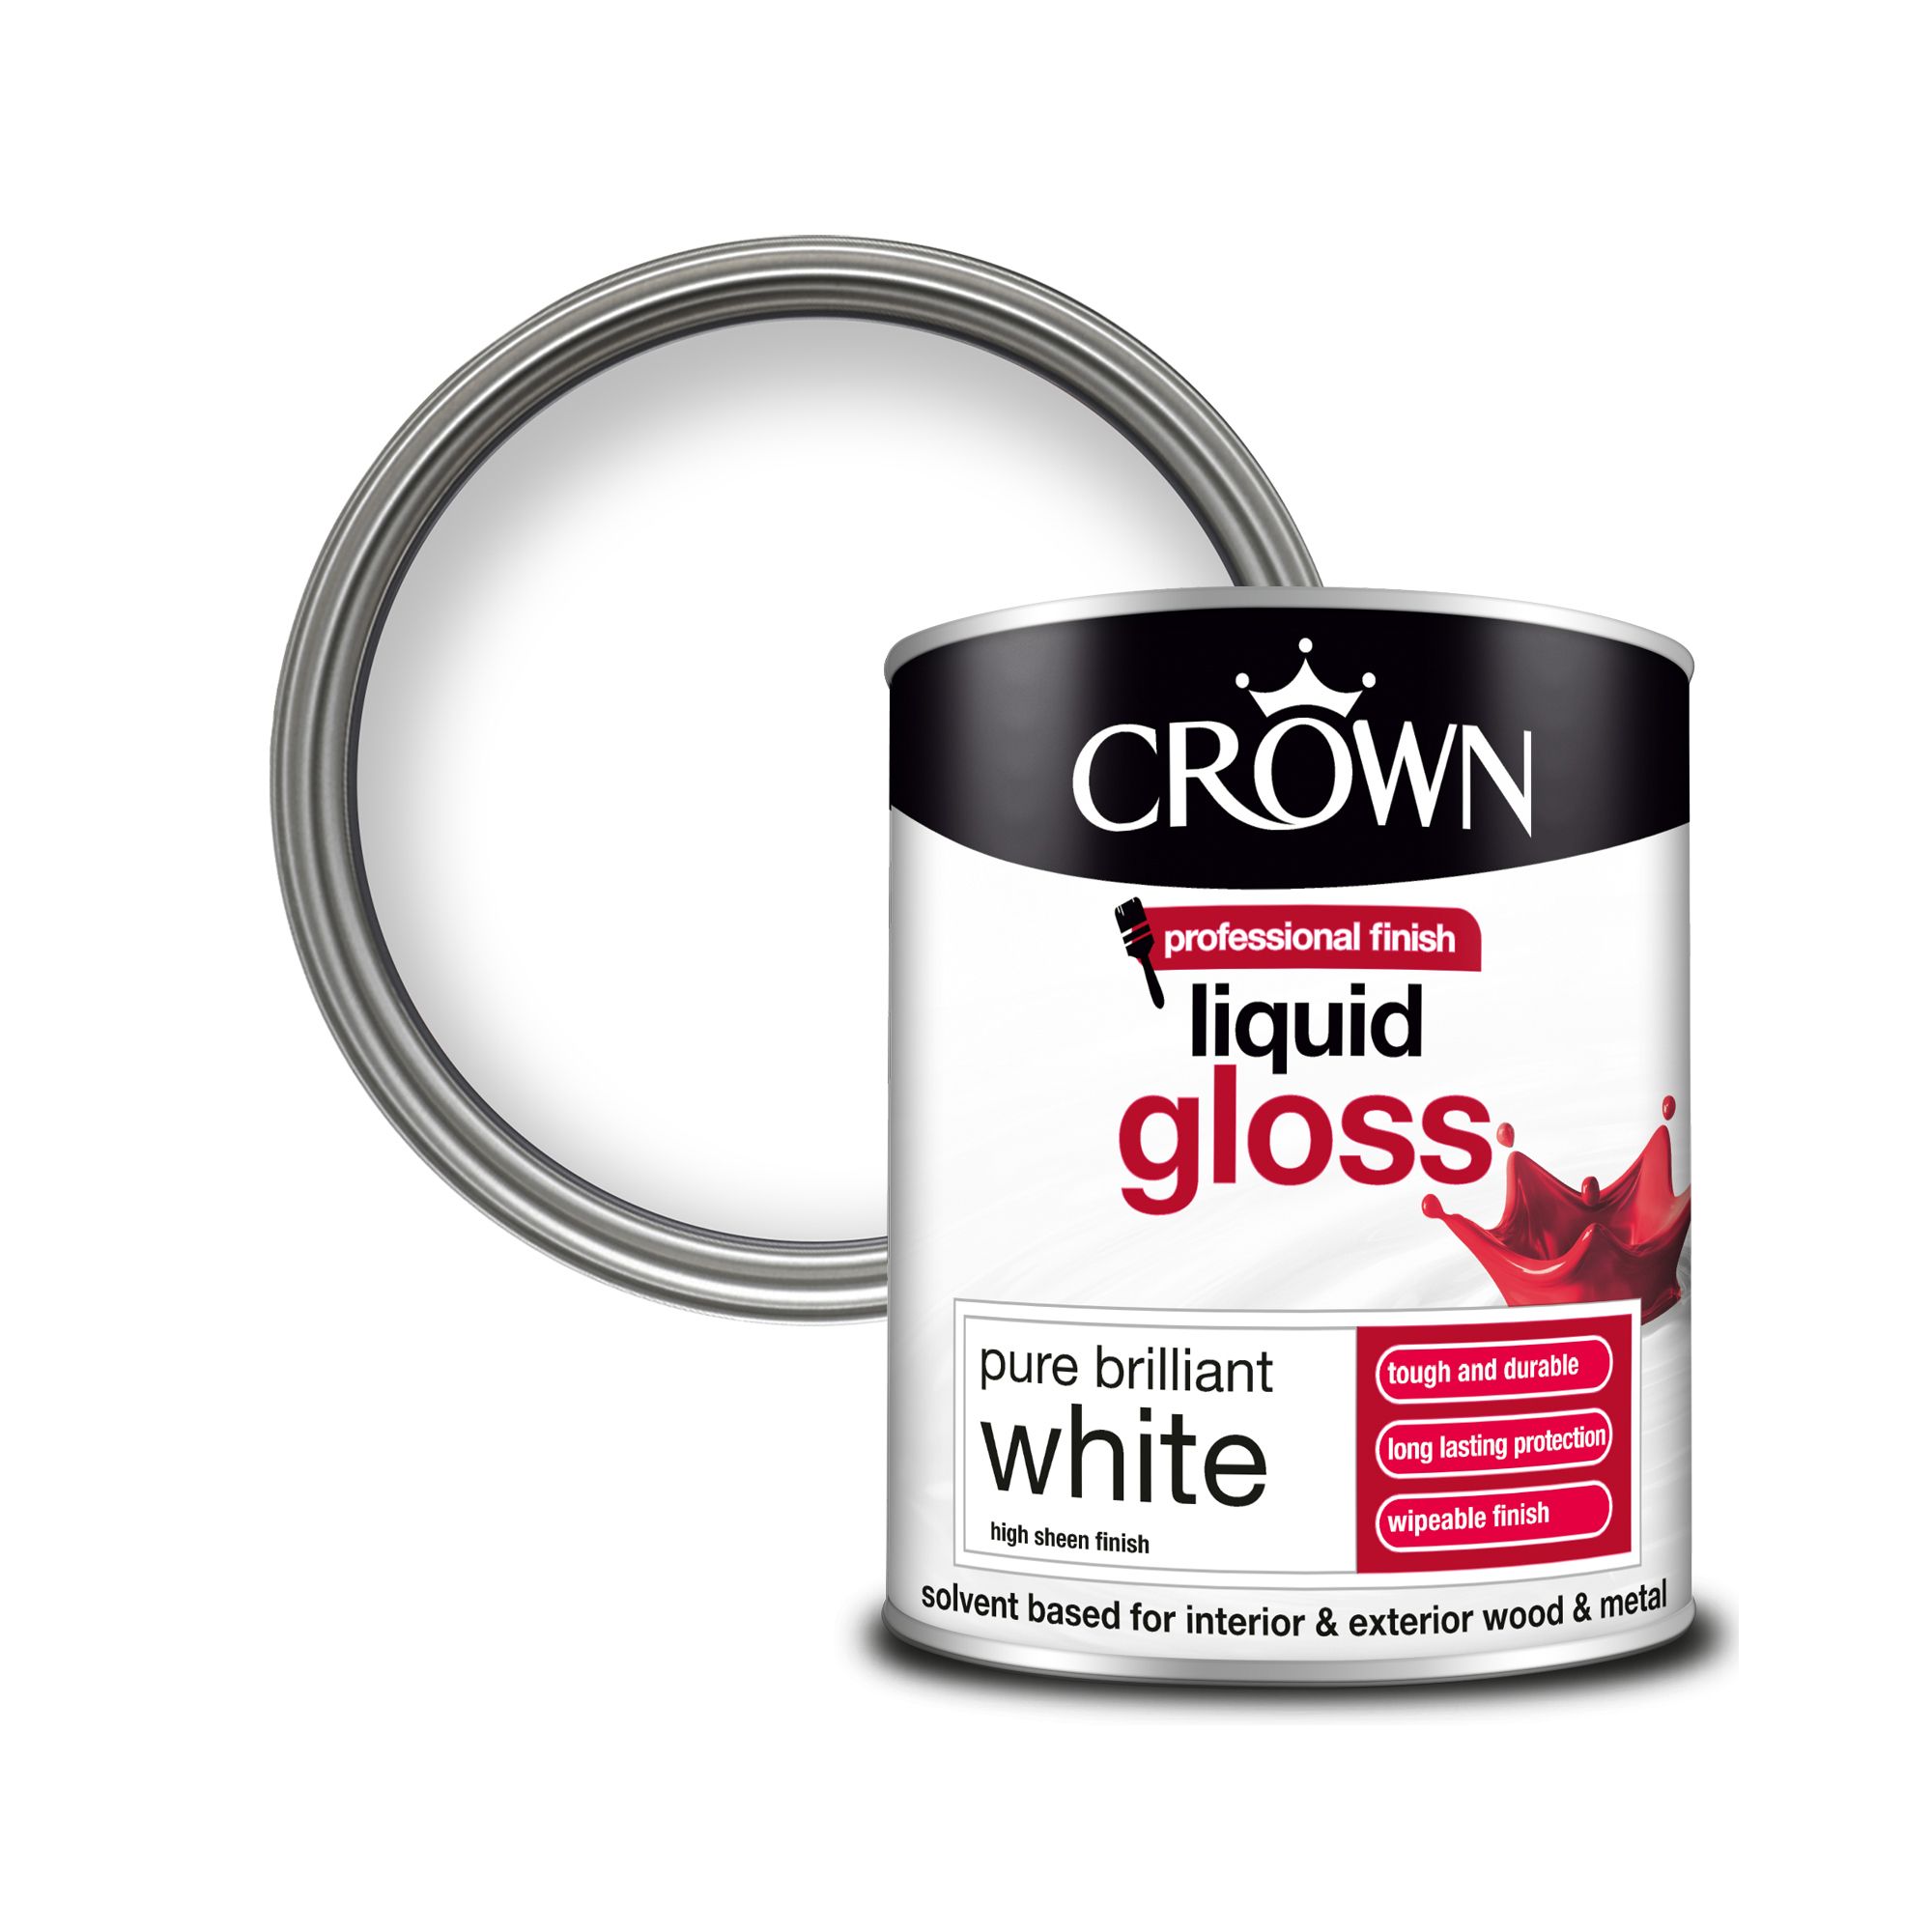 Crown Professional Finish White Gloss Paint 1l~5010131347559 01c Bq?$MOB PREV$&$width=768&$height=768